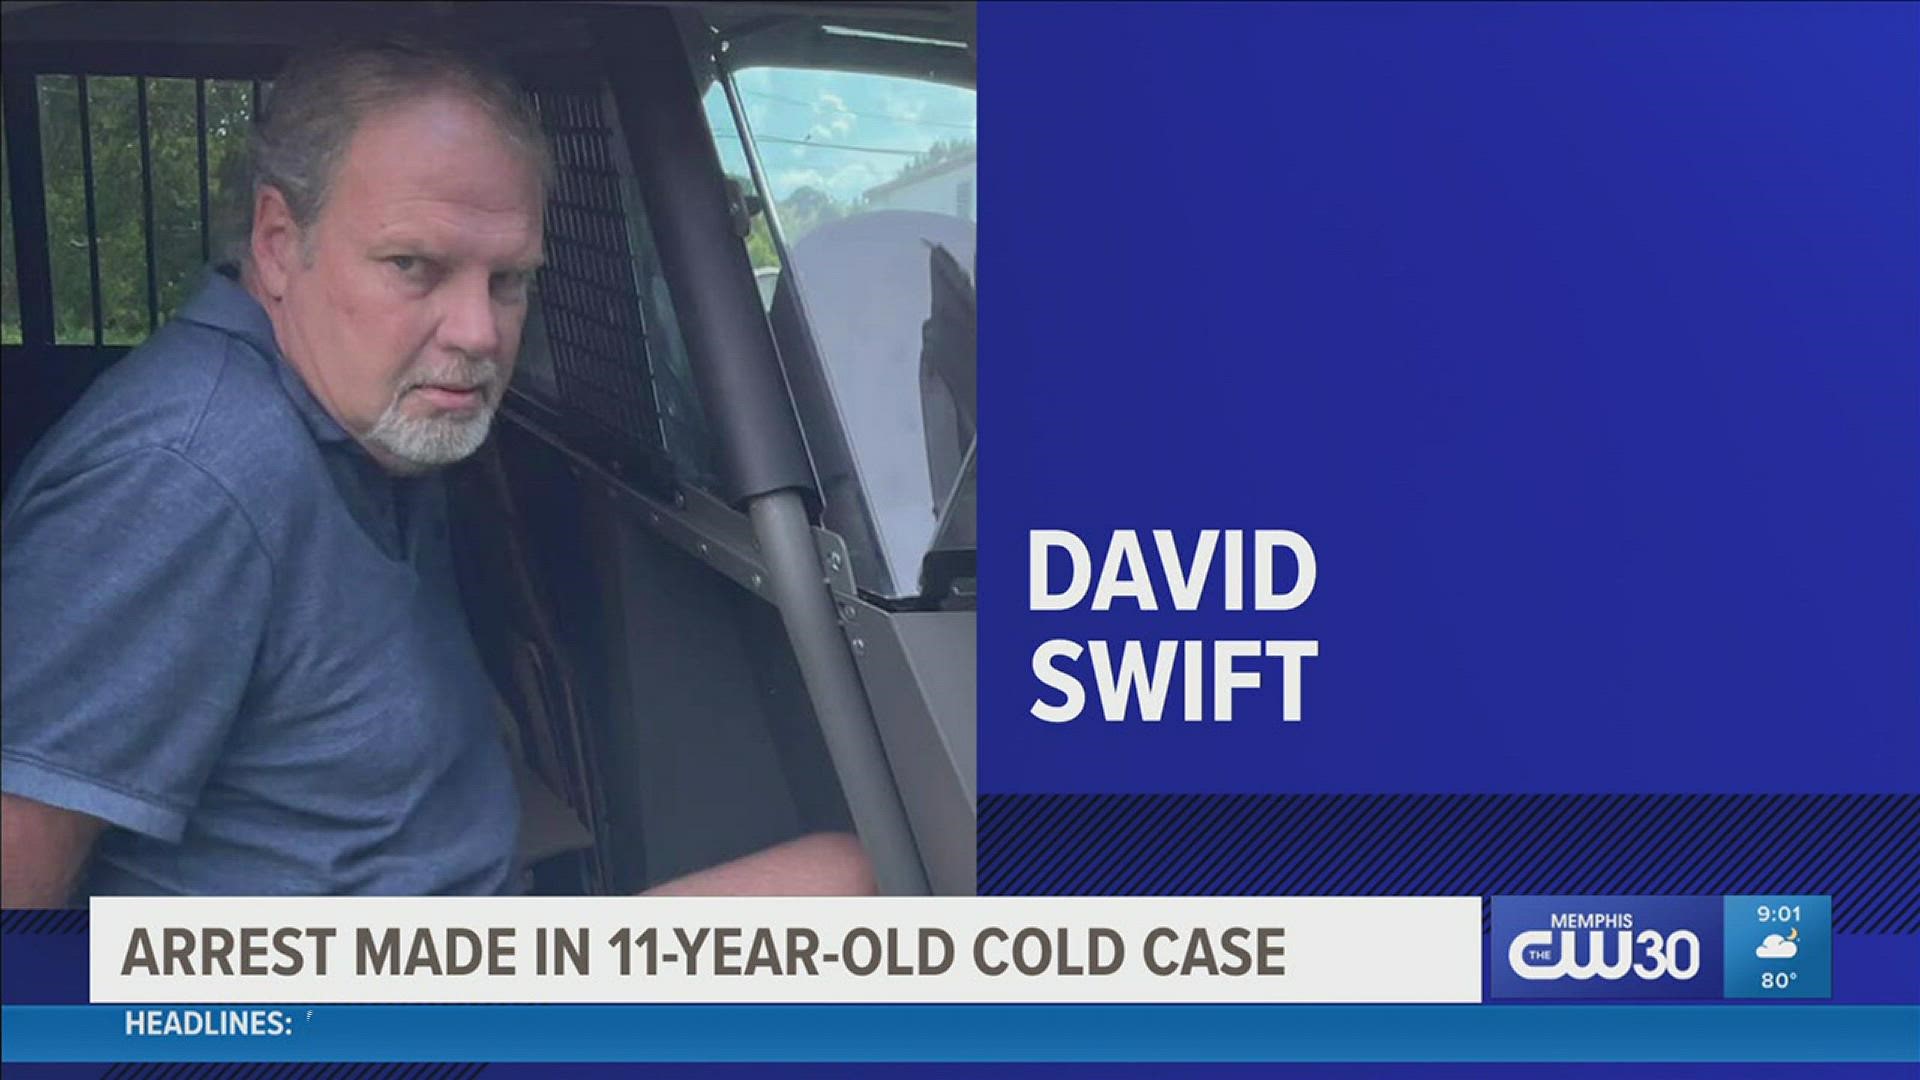 David Swift was arrested in Alabama Monday on a first-degree murder indictment for the 2011 murder of his wife, who filed for divorce 3 weeks before going missing.